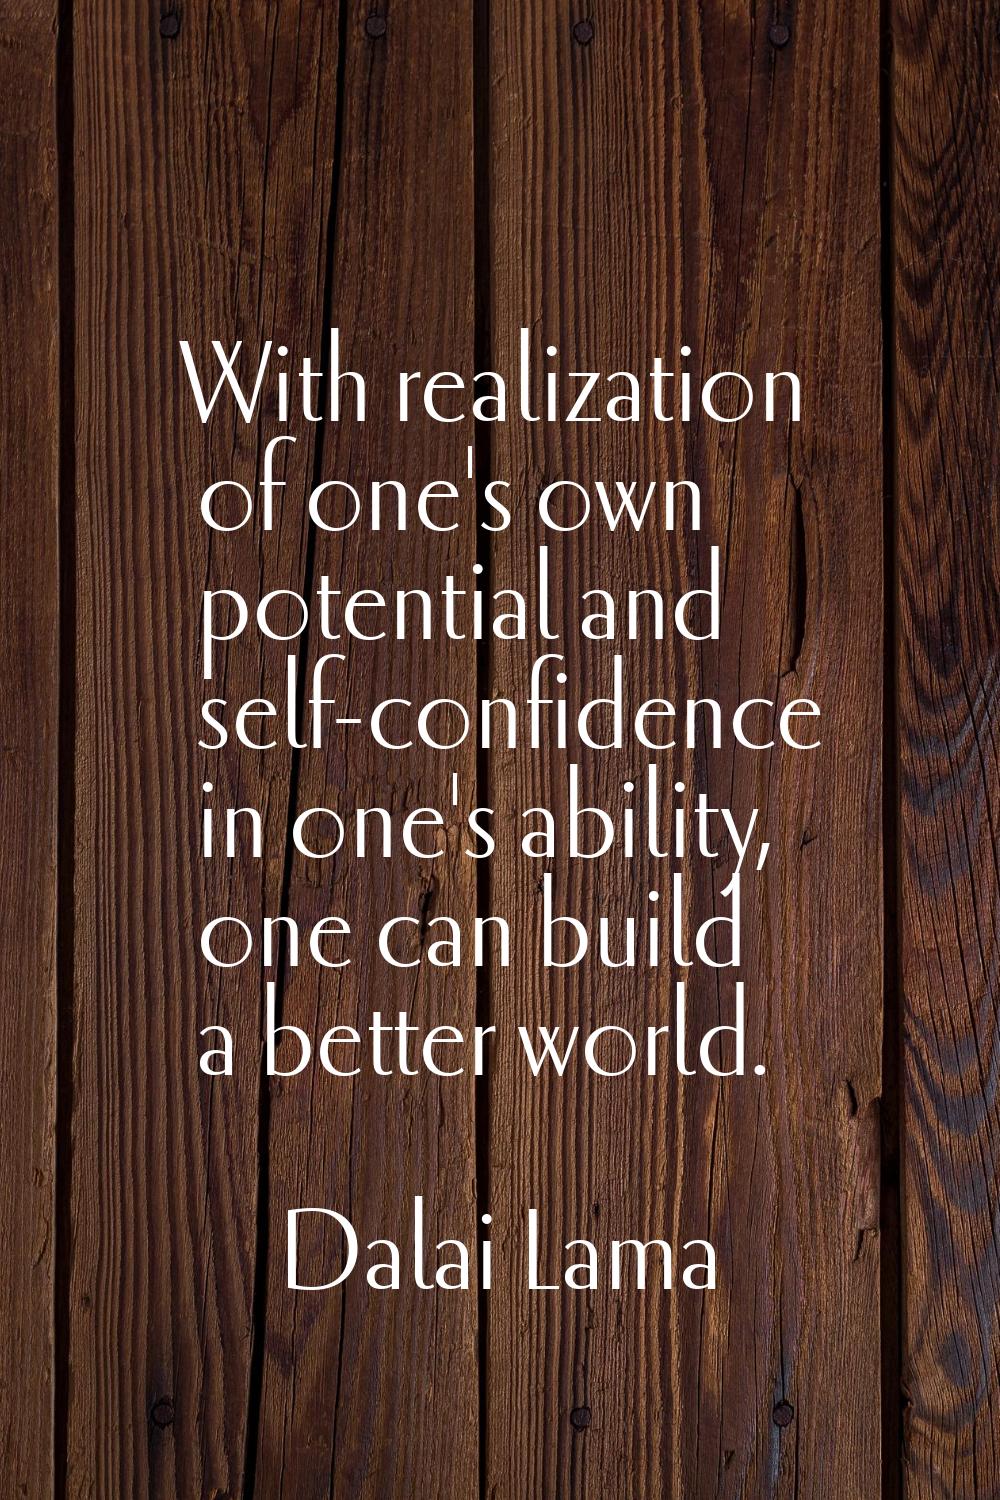 With realization of one's own potential and self-confidence in one's ability, one can build a bette